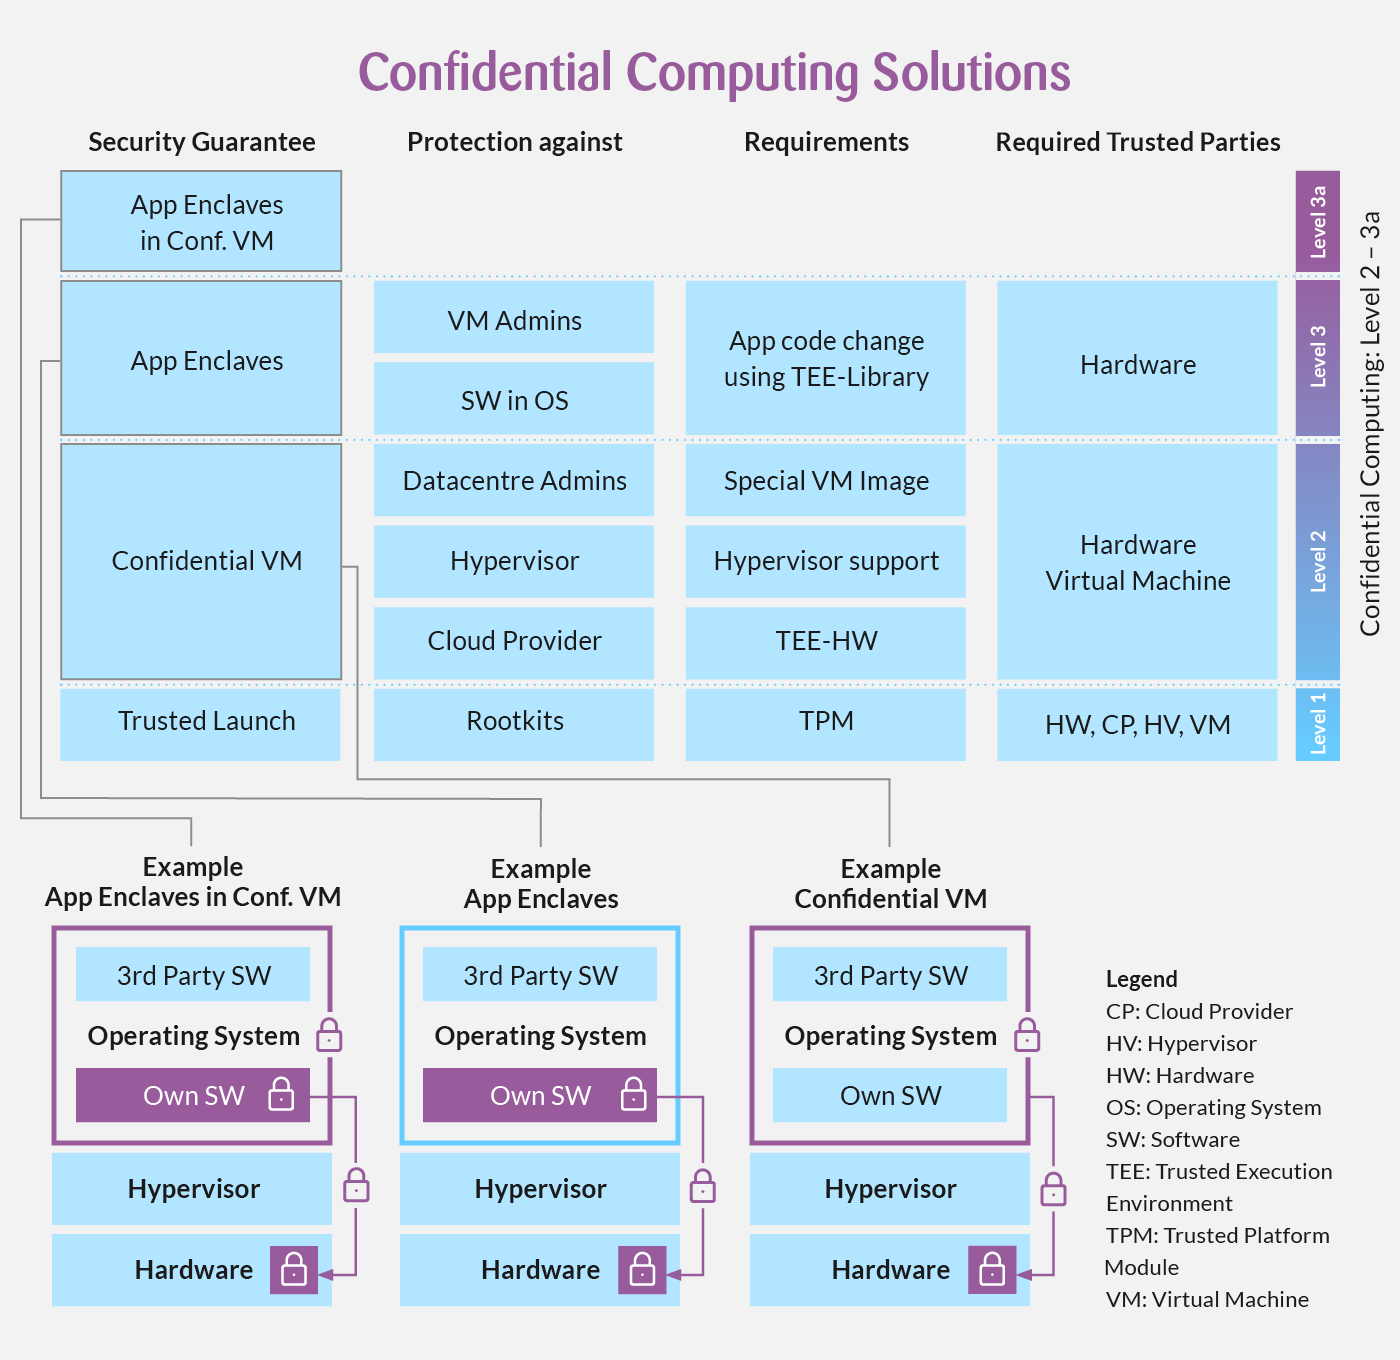 Confidential Computing Solutions